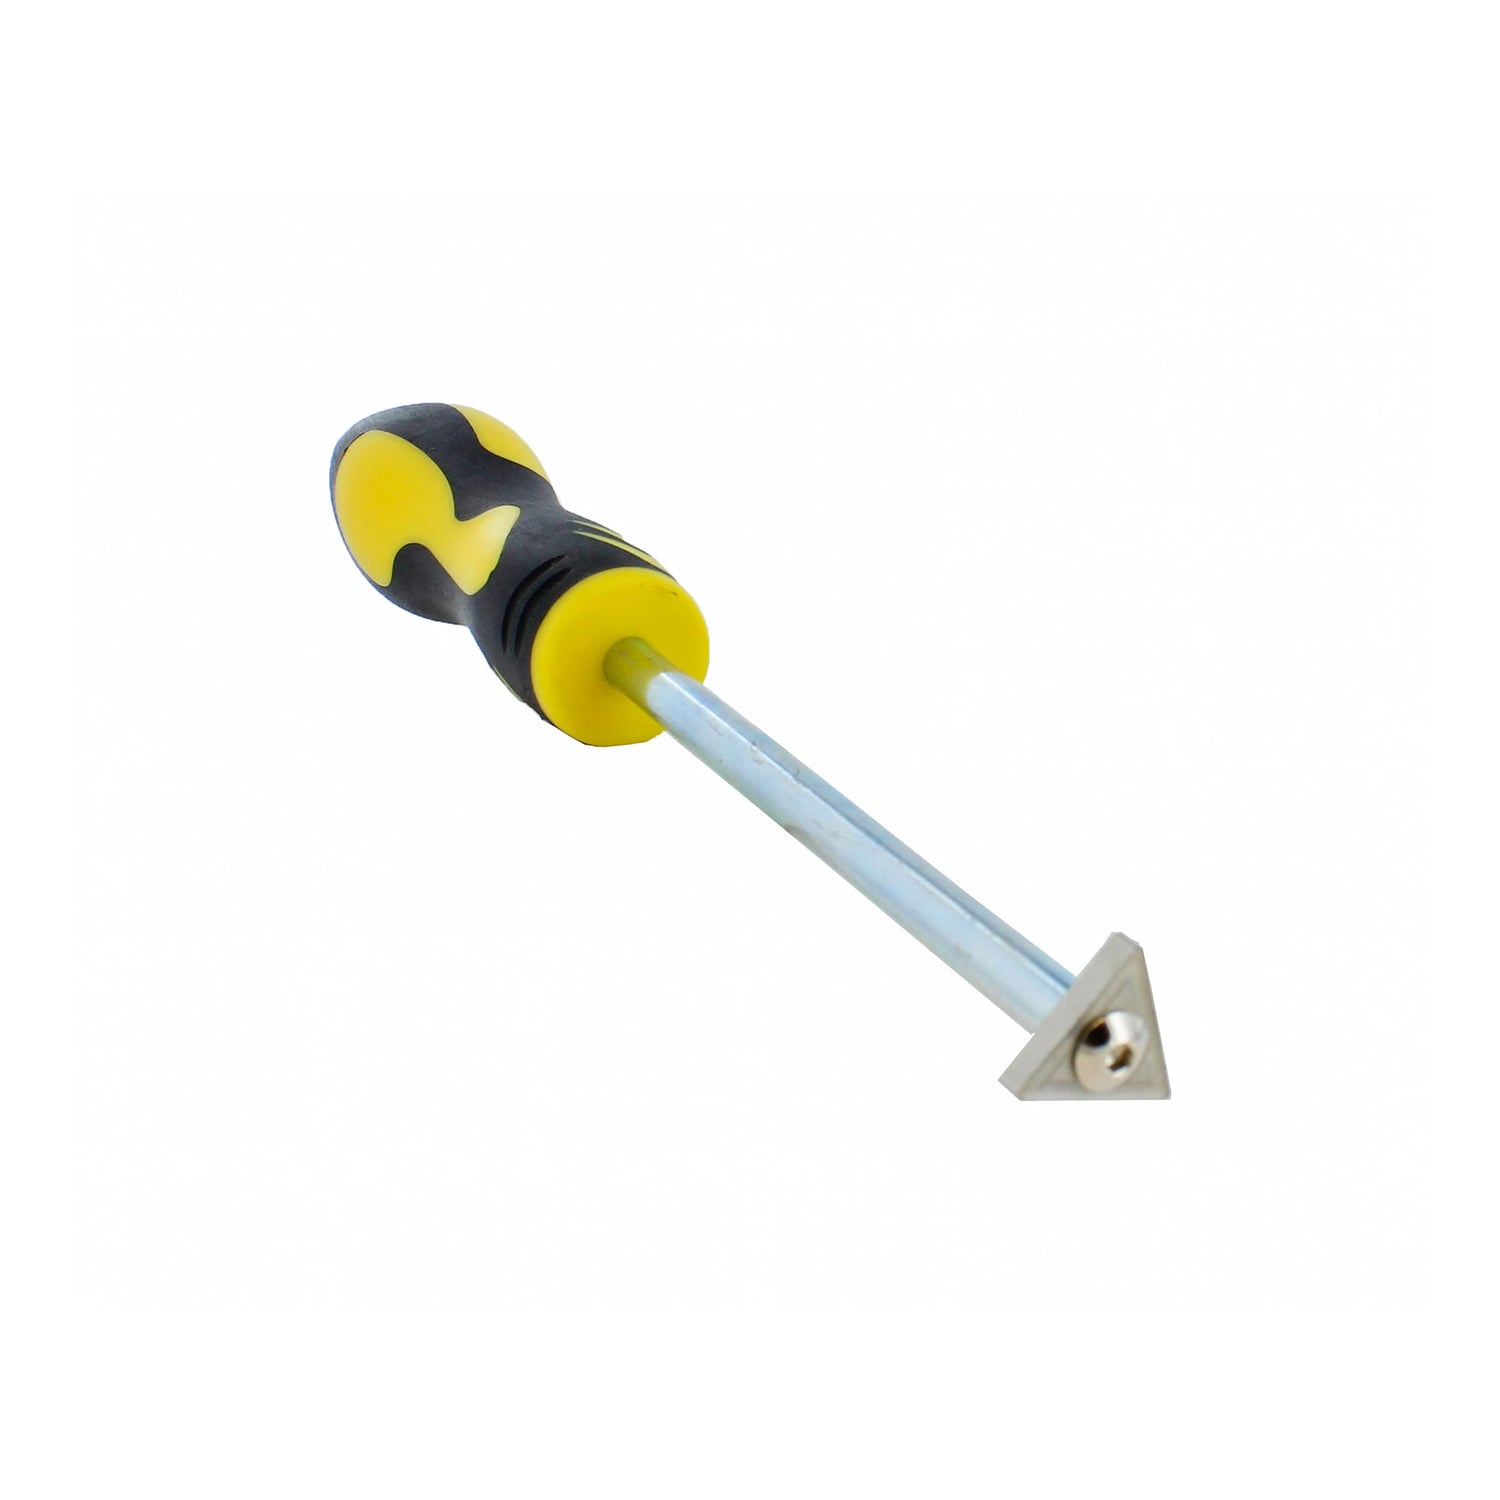 grout remover tool